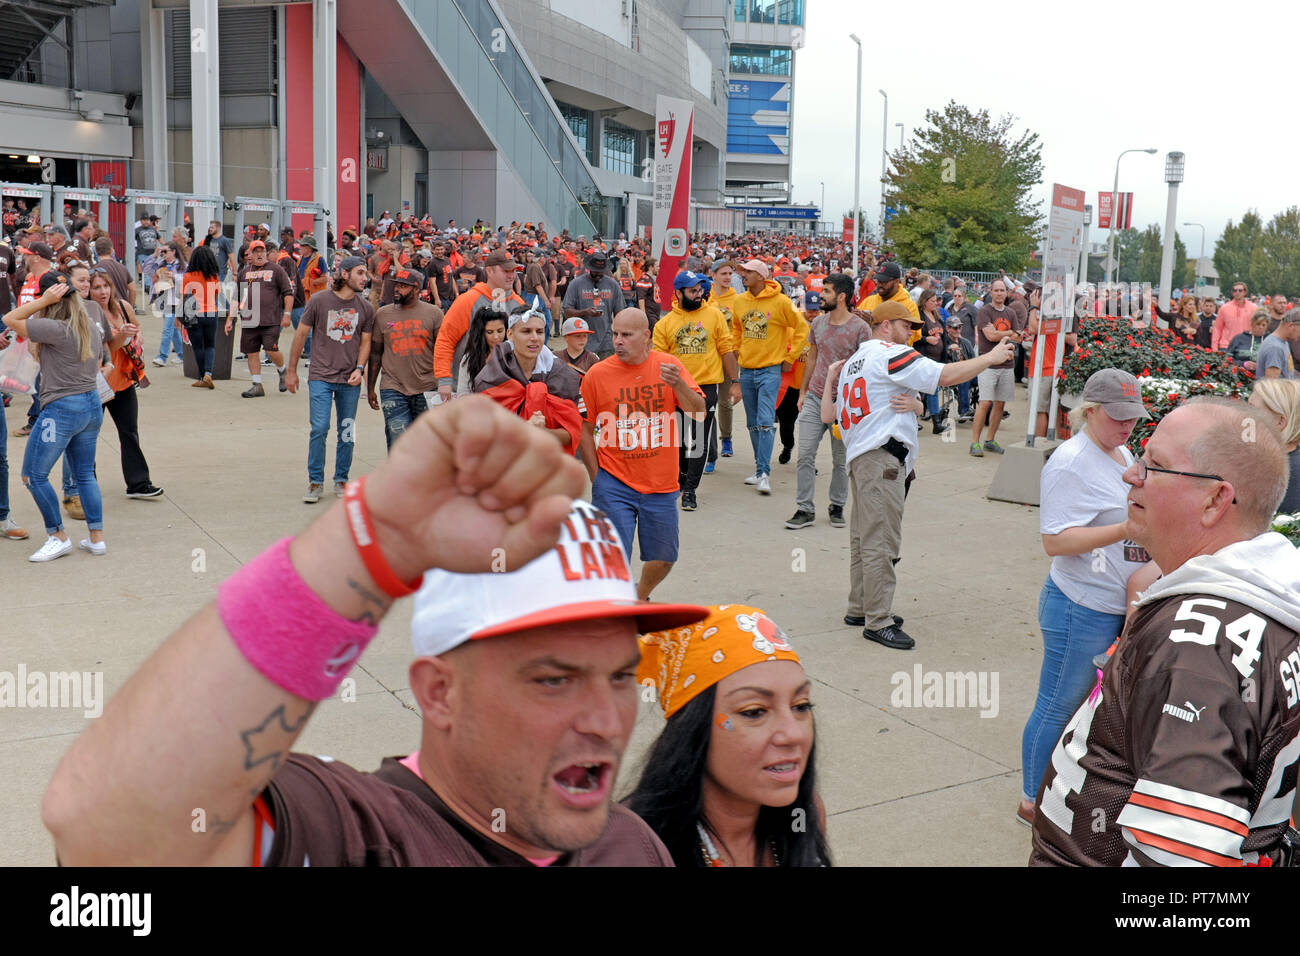 Cleveland, Ohio, USA. 7 Oct, 2018.  Cleveland Browns football fans celebrate as they leave FirstEnergy Stadium in downtown Cleveland, Ohio after beating the Baltimore Ravens 12-9 in overtime.  The win was the second for Cleveland this season.  Credit: Mark Kanning/Alamy Live News. Stock Photo